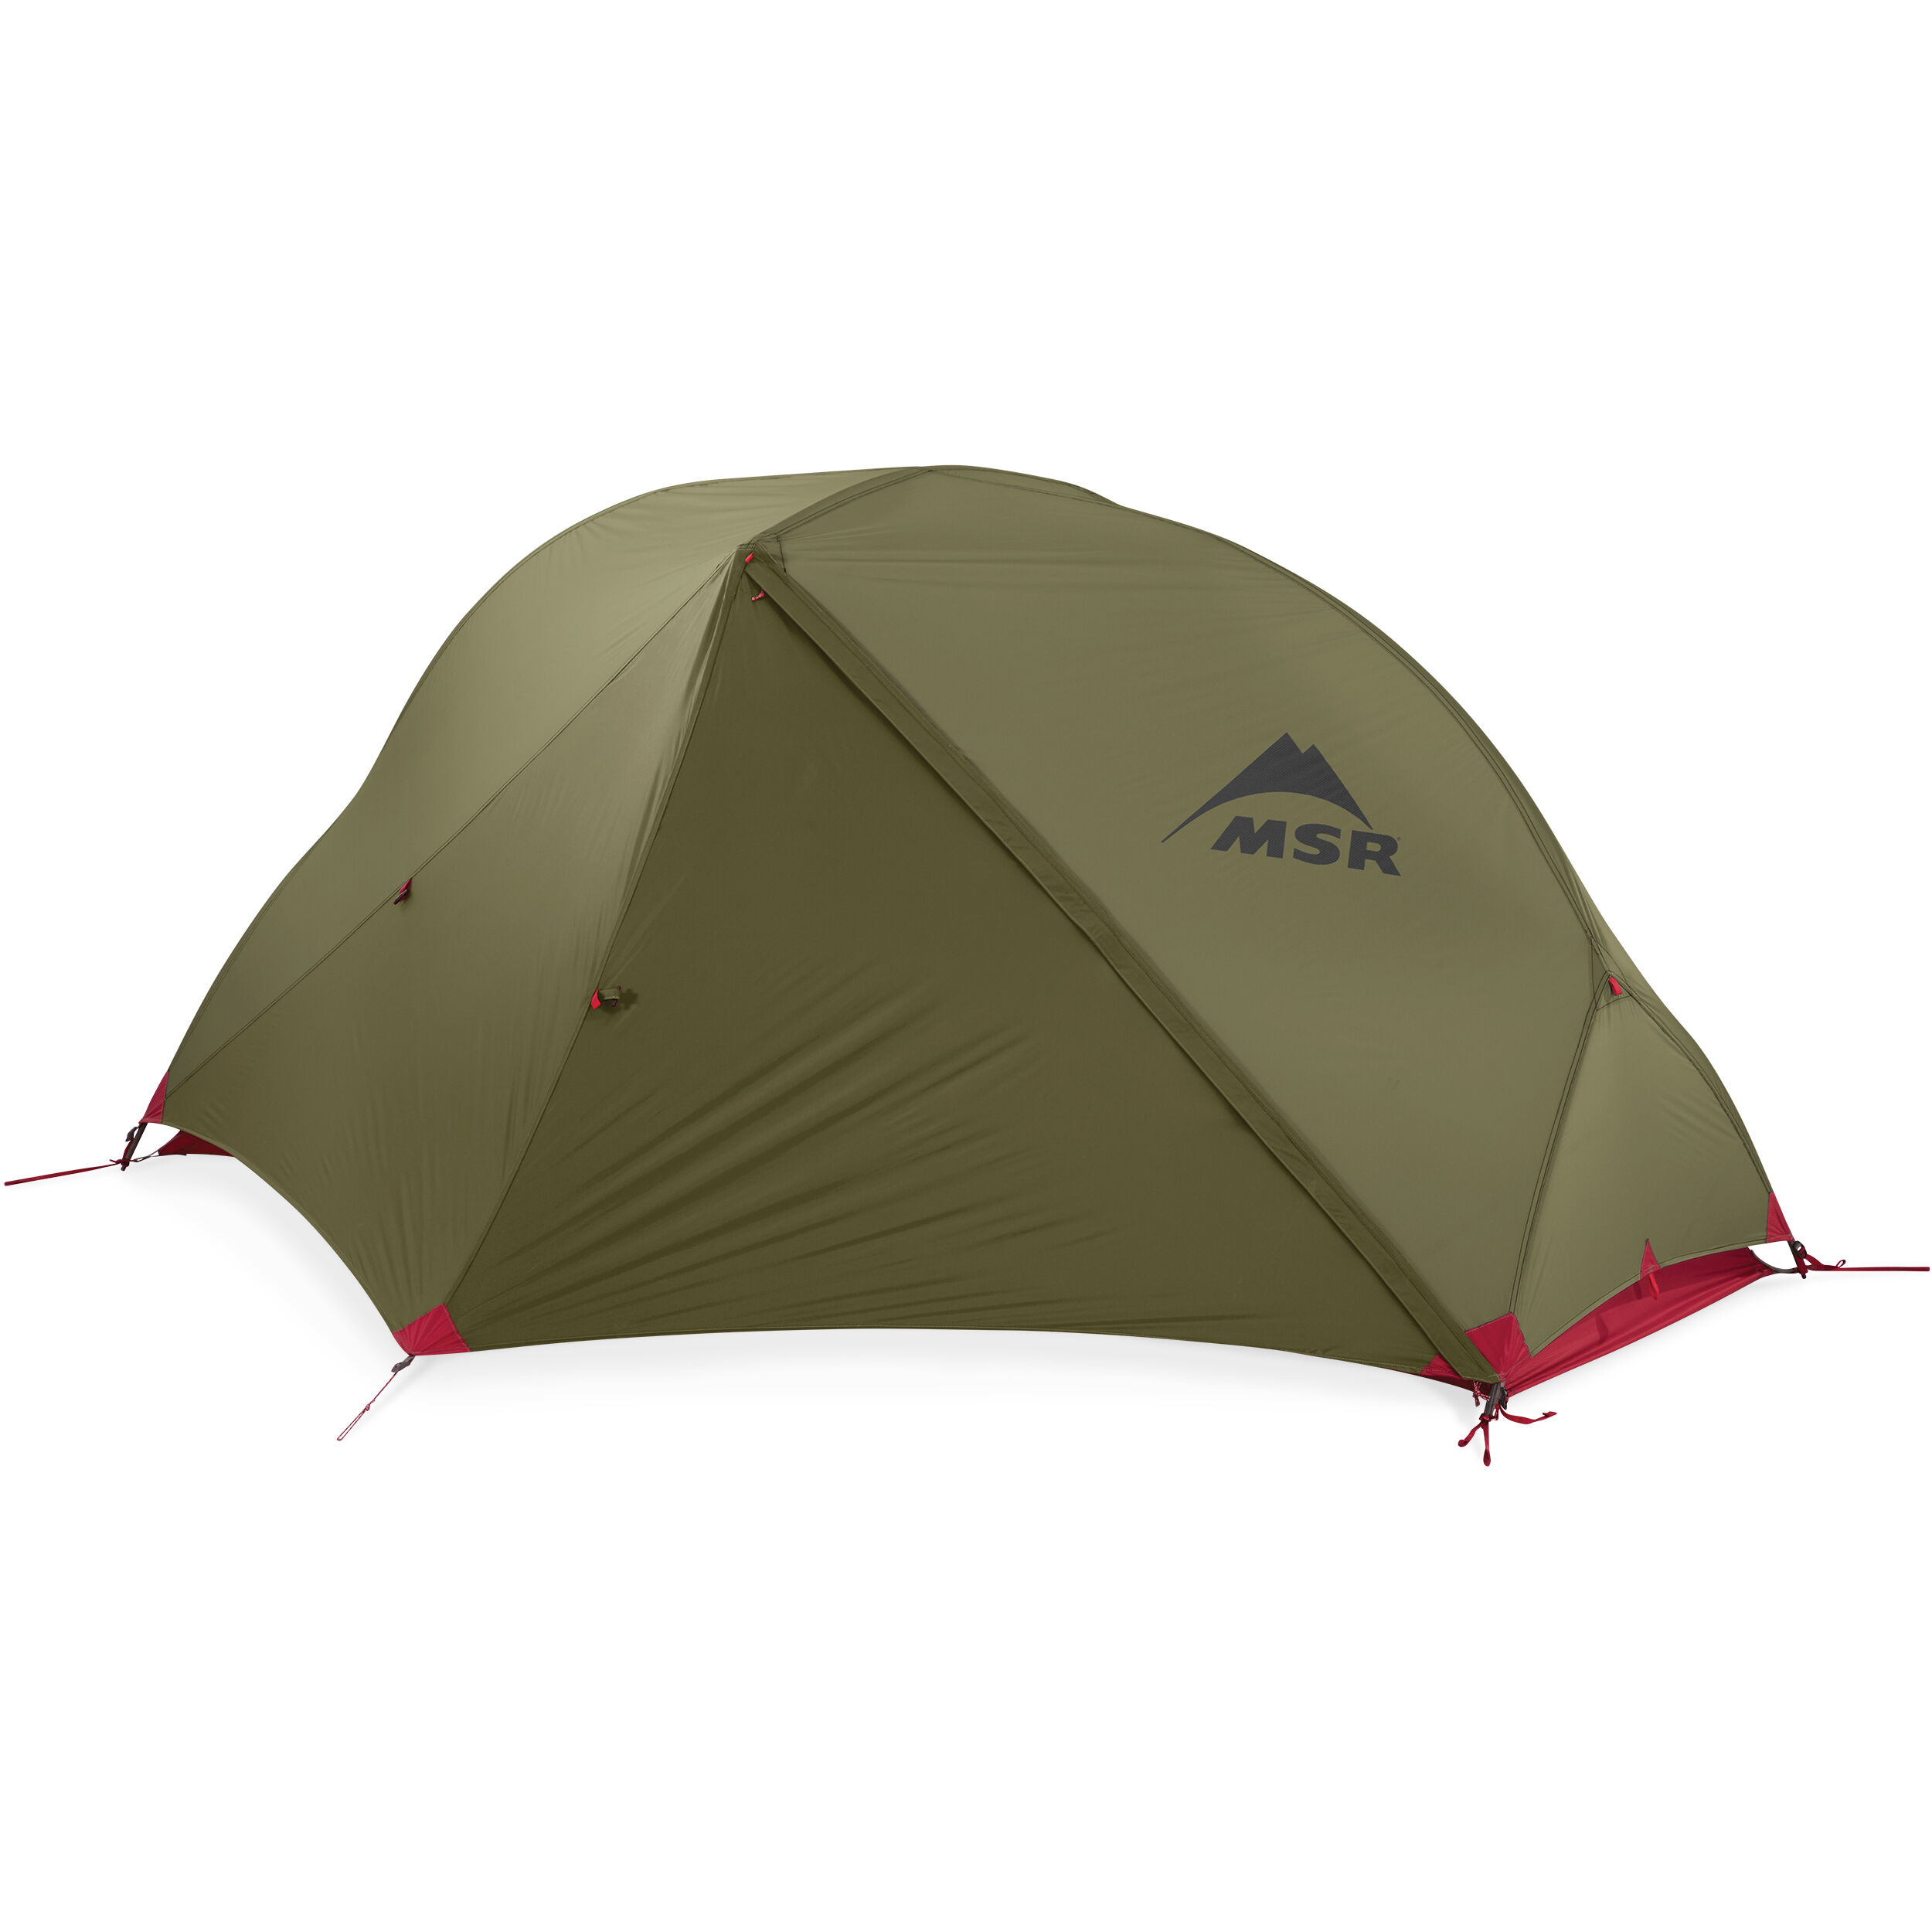 Hubba™ NX Solo Backpacking Tent | Backpacking Tents | MSR